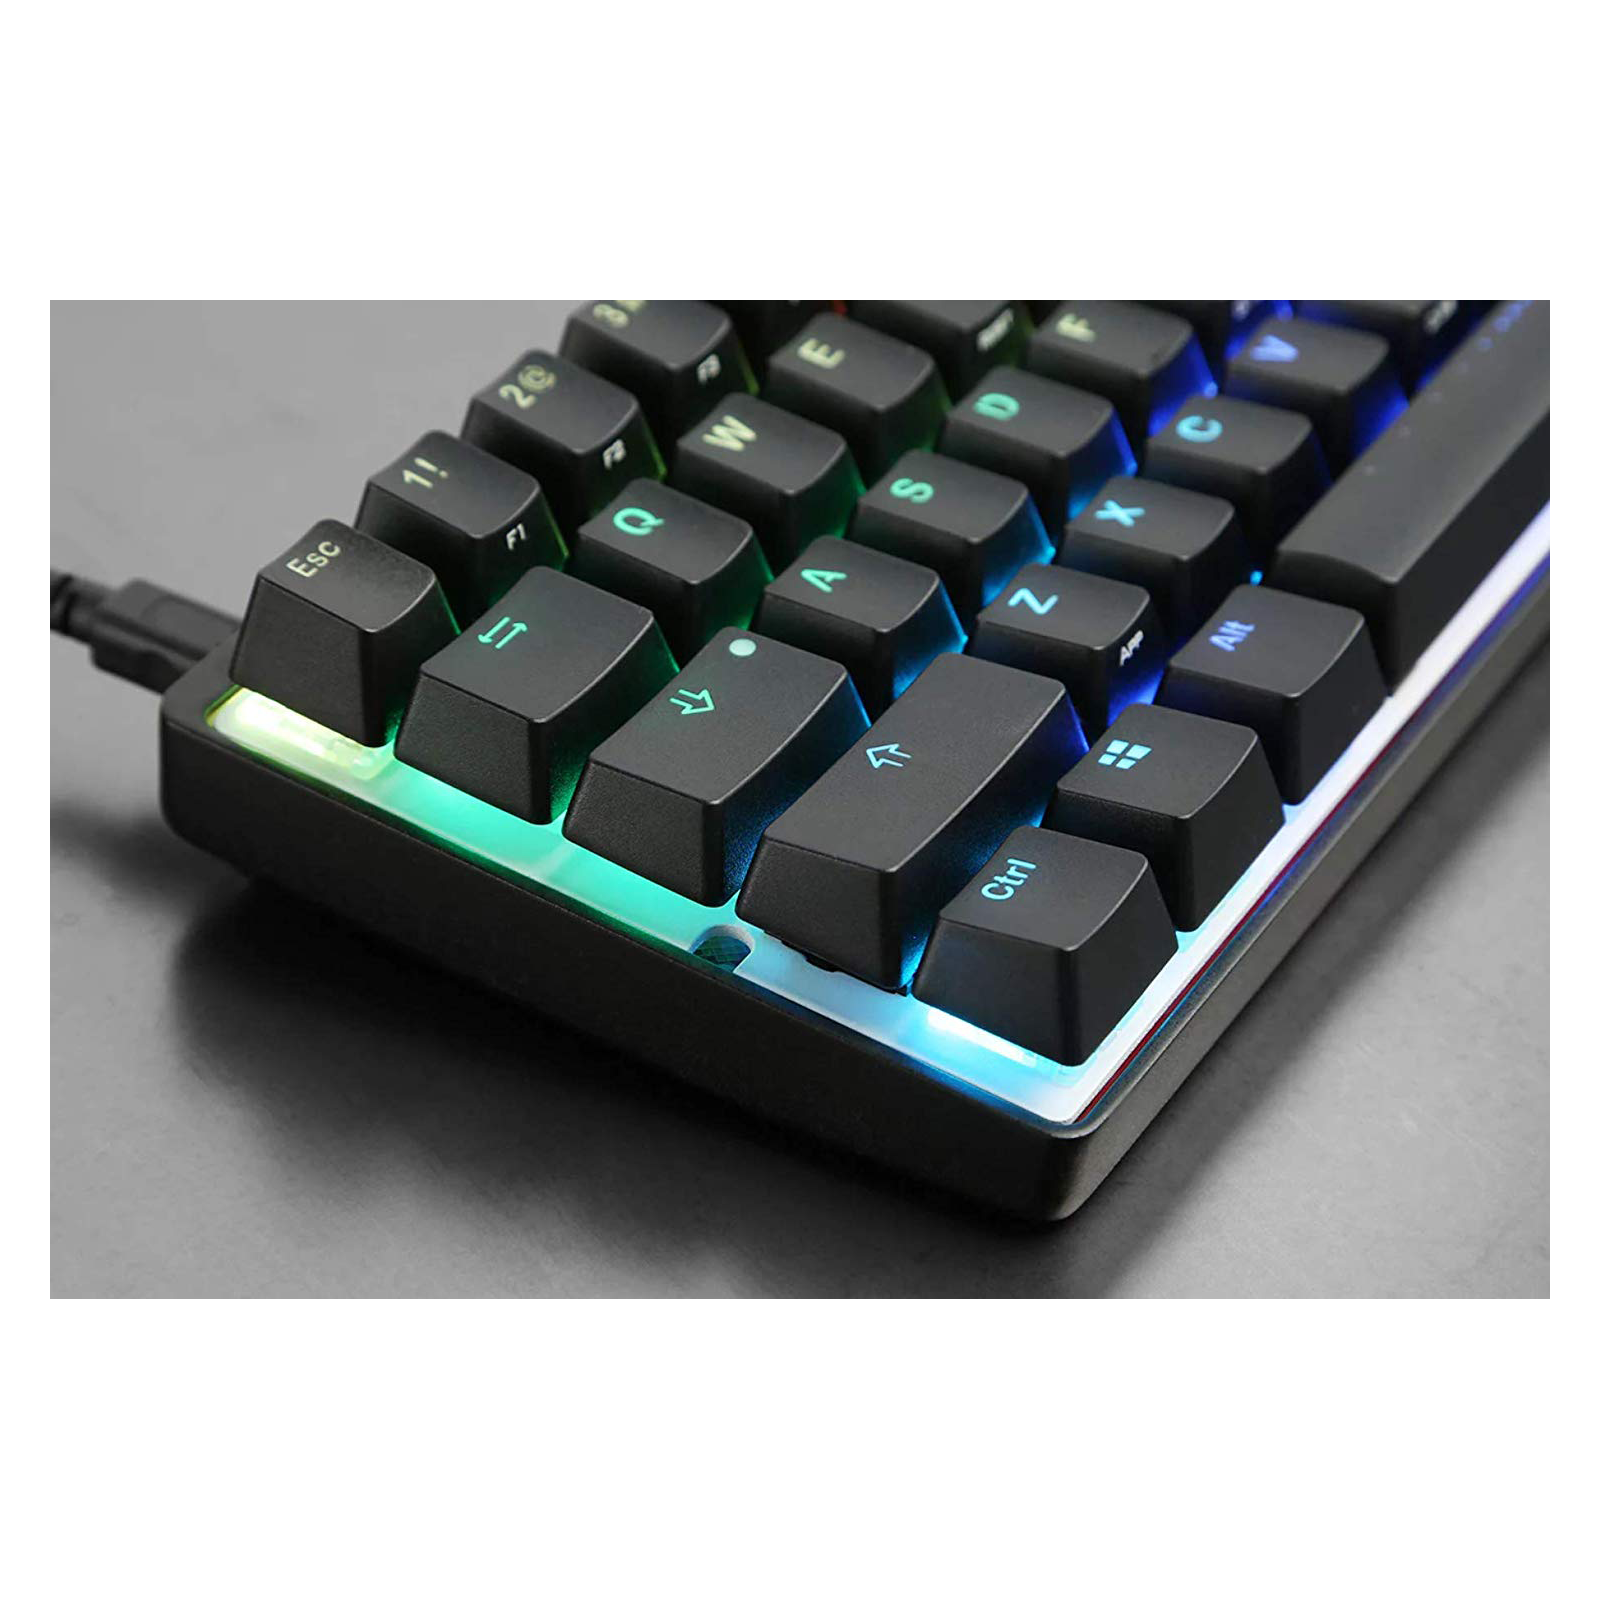 Best USB Keyboard for Windows and Mac for 2019 | Vortex Pok3r RGB with Cherry MX switches